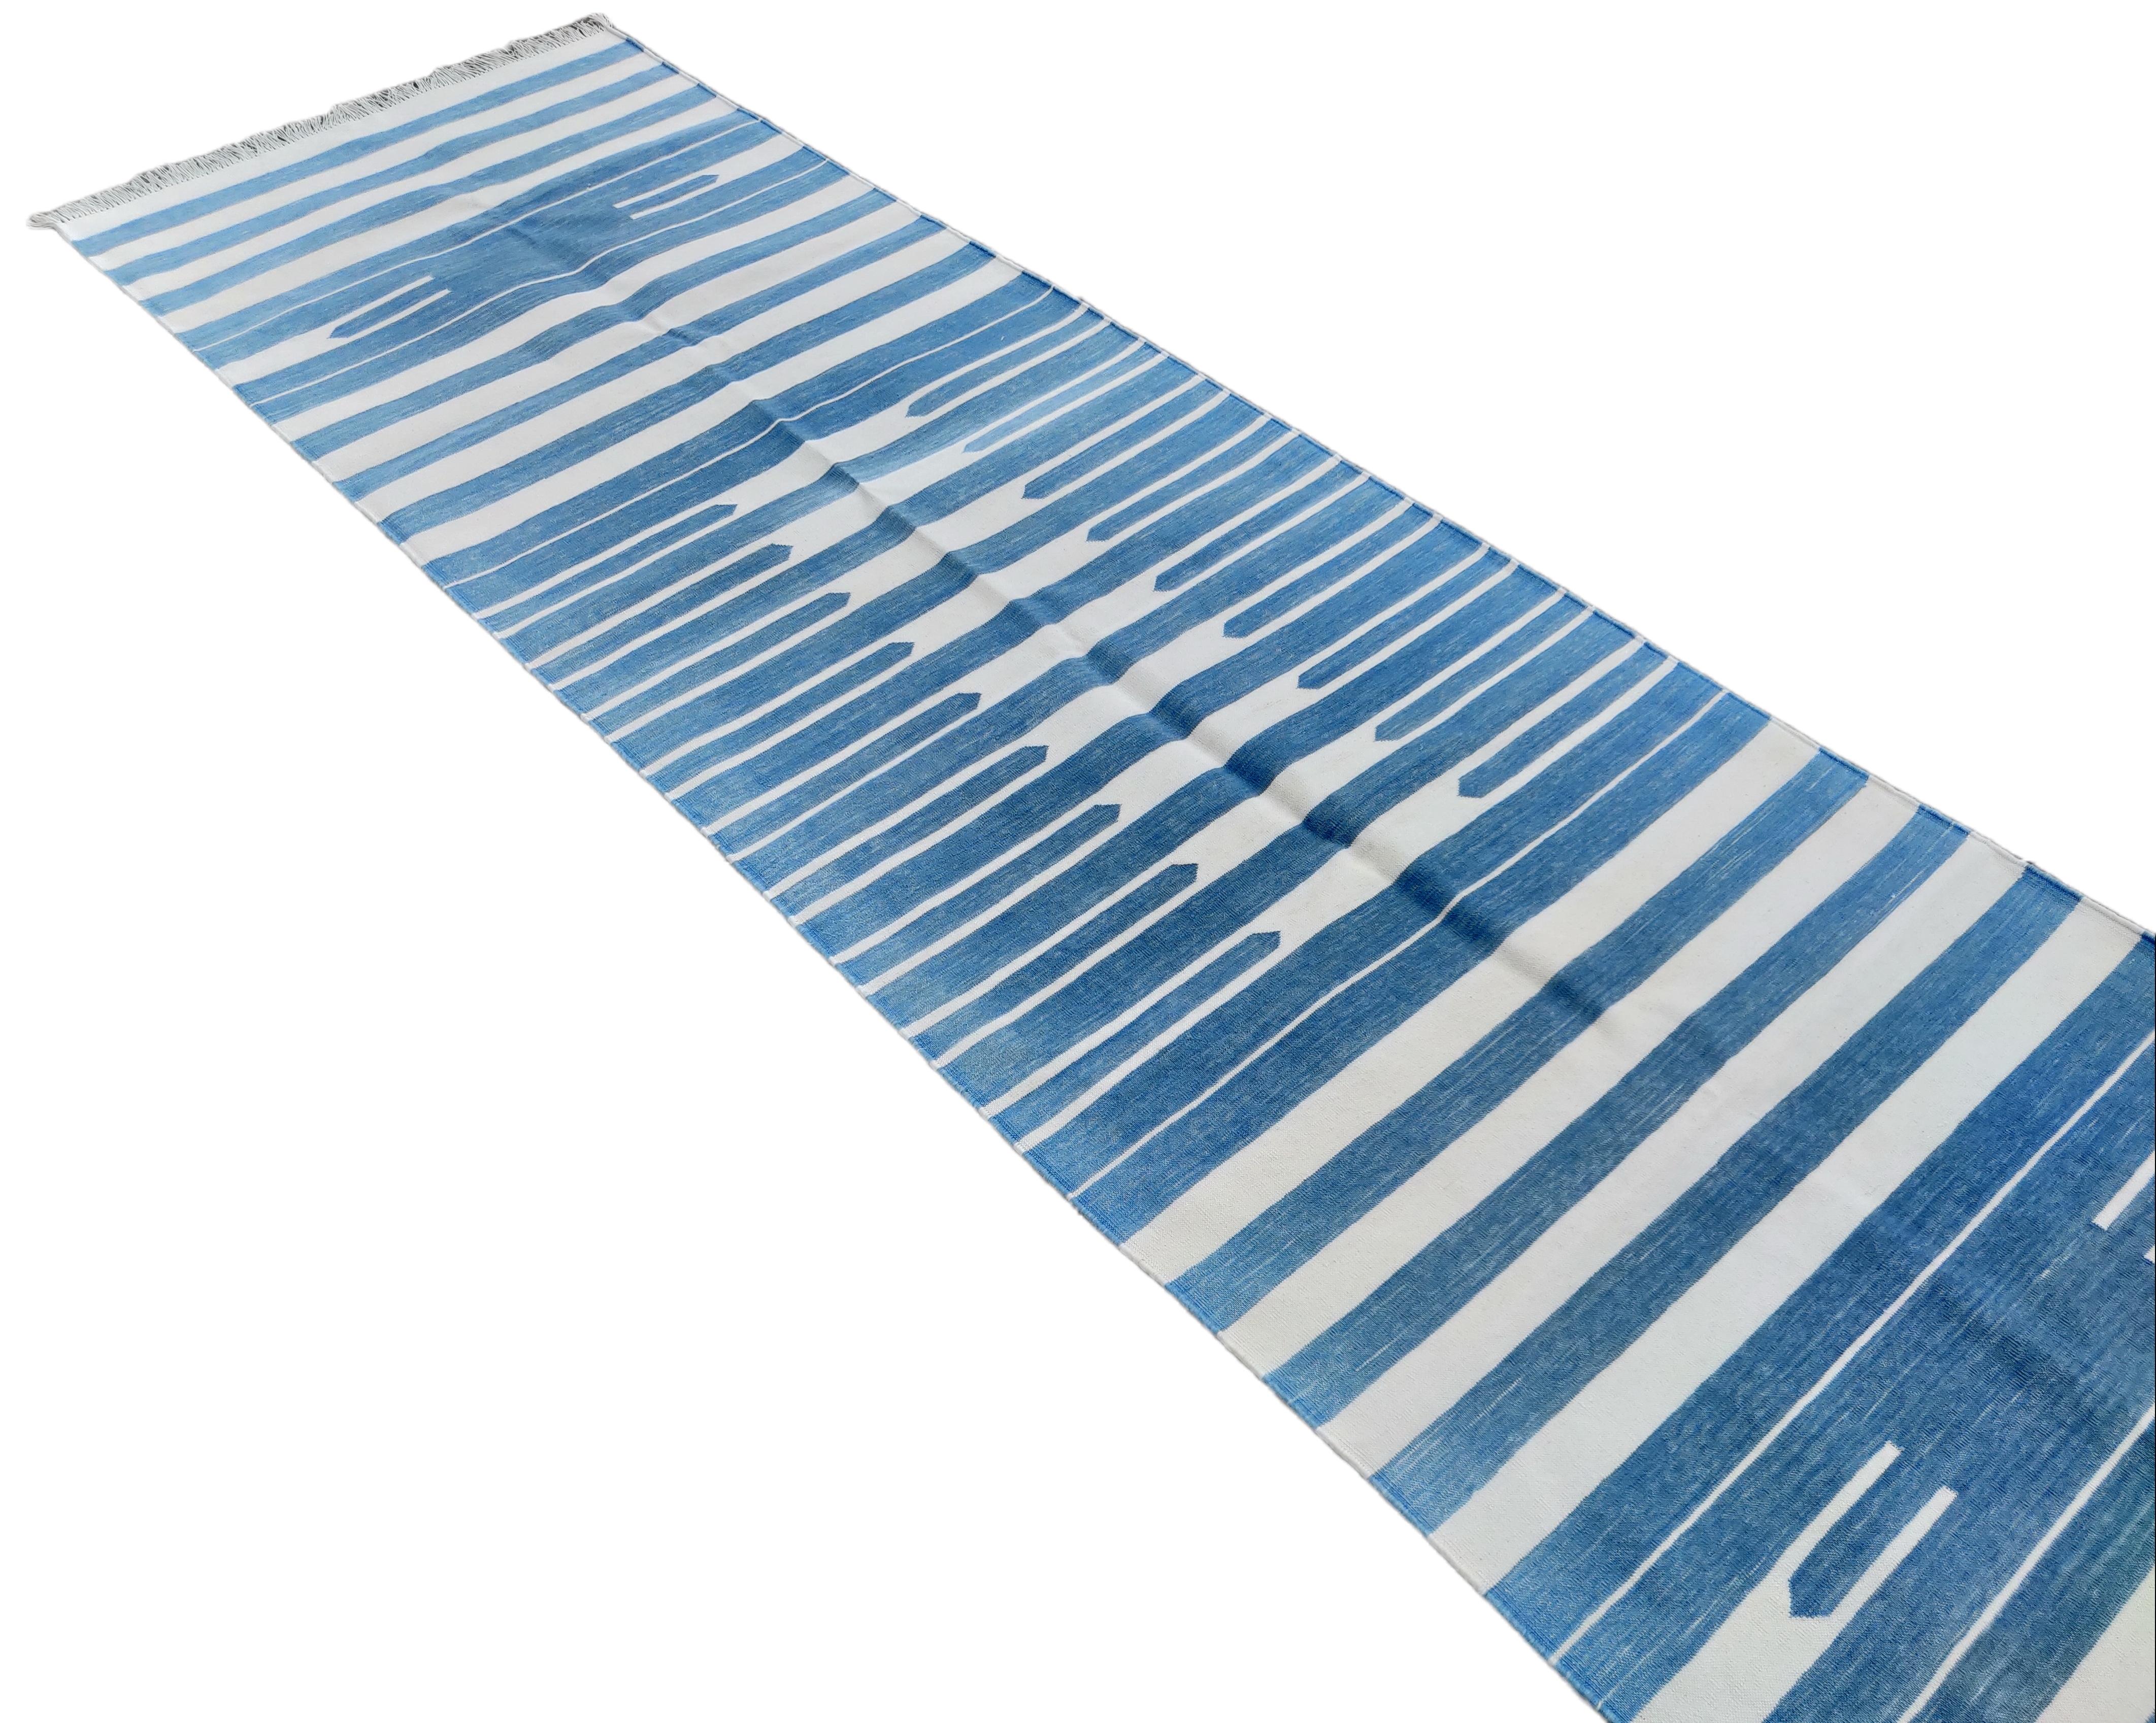 Indian Handmade Cotton Area Flat Weave Runner, 3x8 Blue And White Striped Dhurrie Rug For Sale